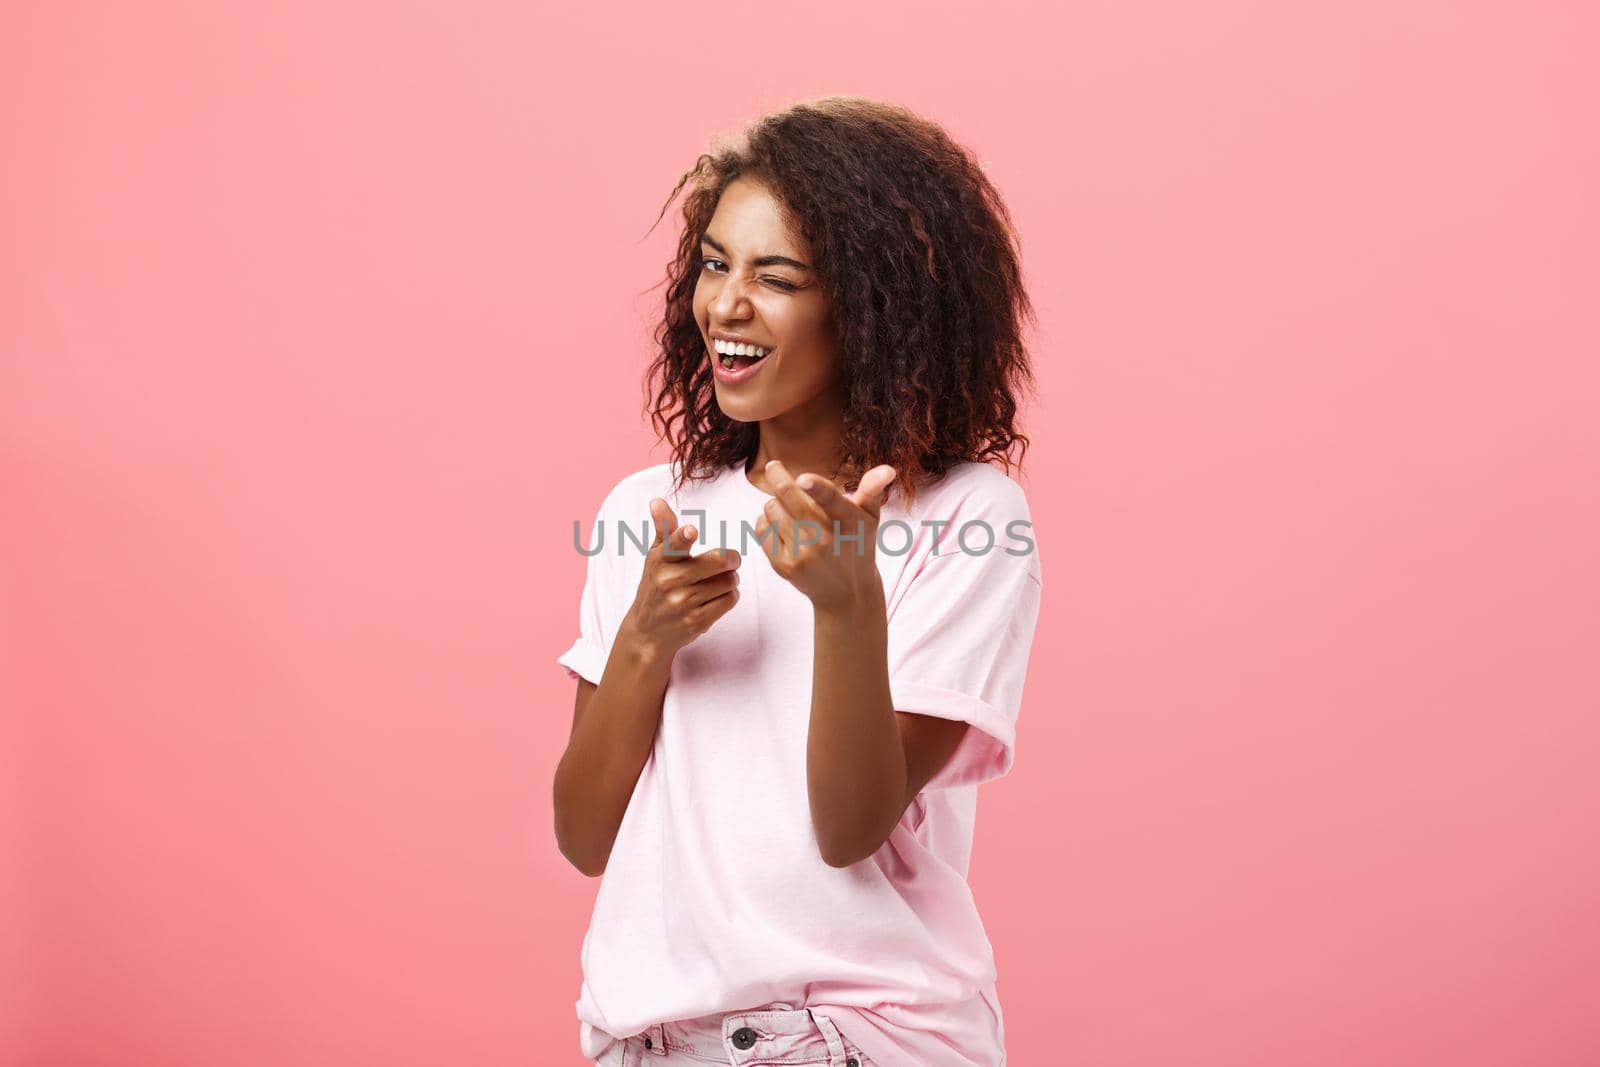 Hey you awesome. Playful charming and happy carefree dark-skinned trendy girl with curly hairstyle winking and smiling broadly making finger gun move towards camera checking out cool outfit.